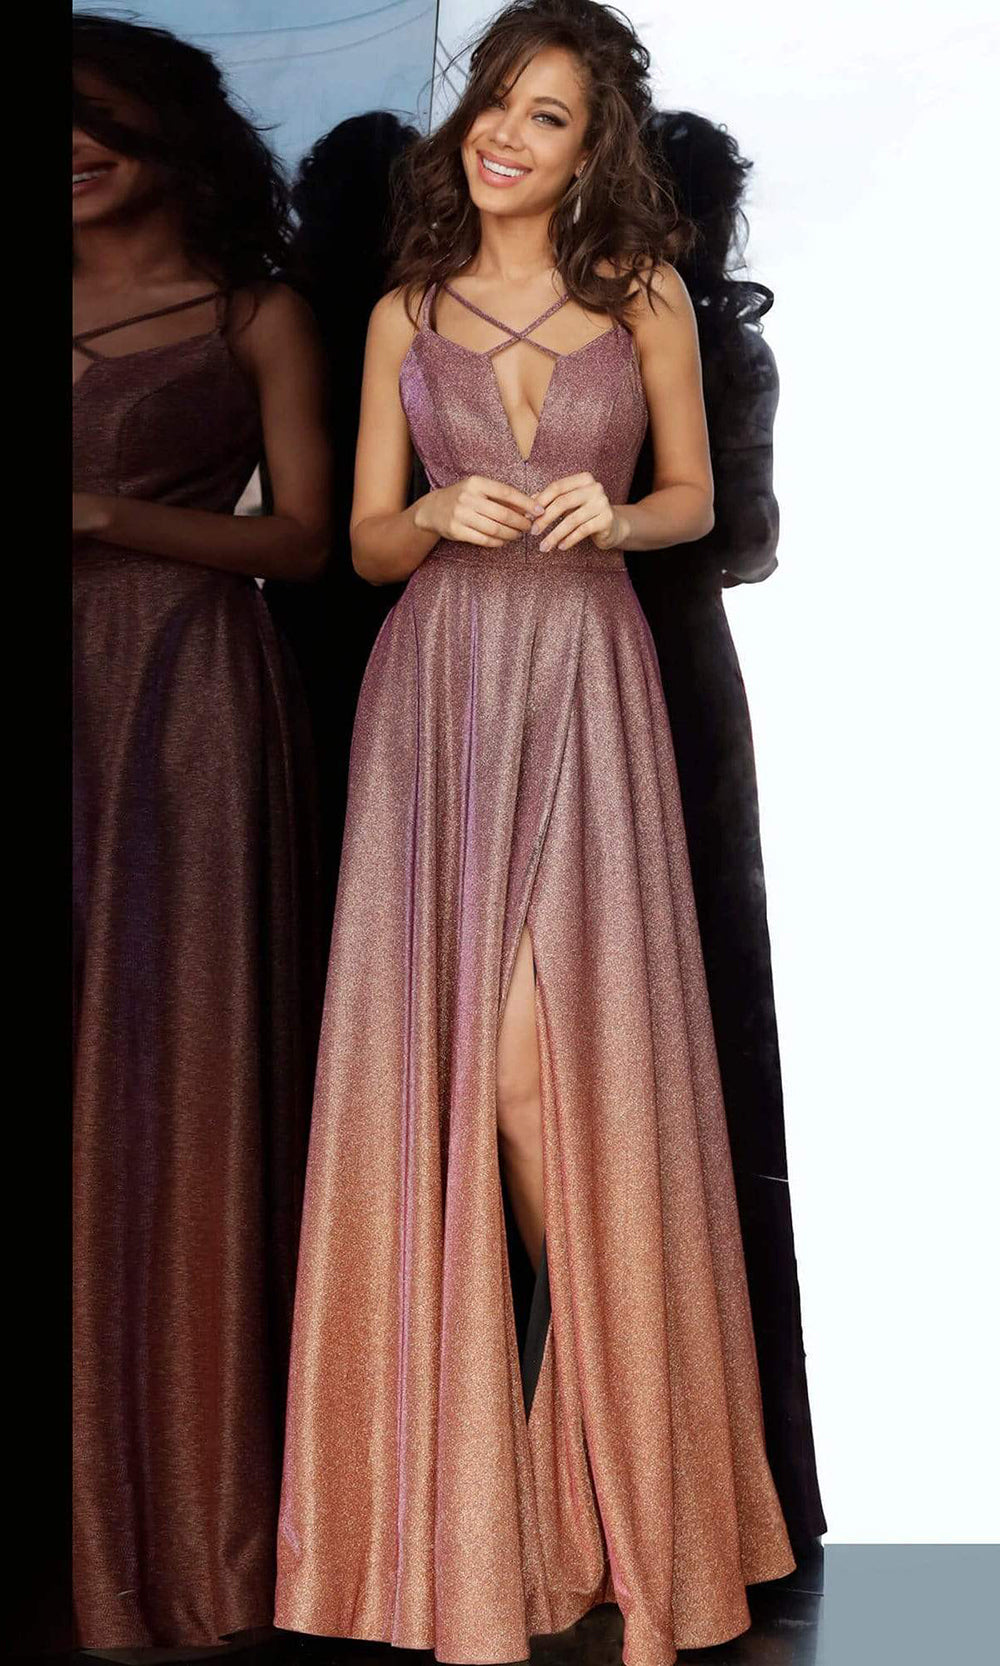 Jovani - Spaghetti Straps Metallic Long Gown With Slit JVN4327SC In Purple and Gold